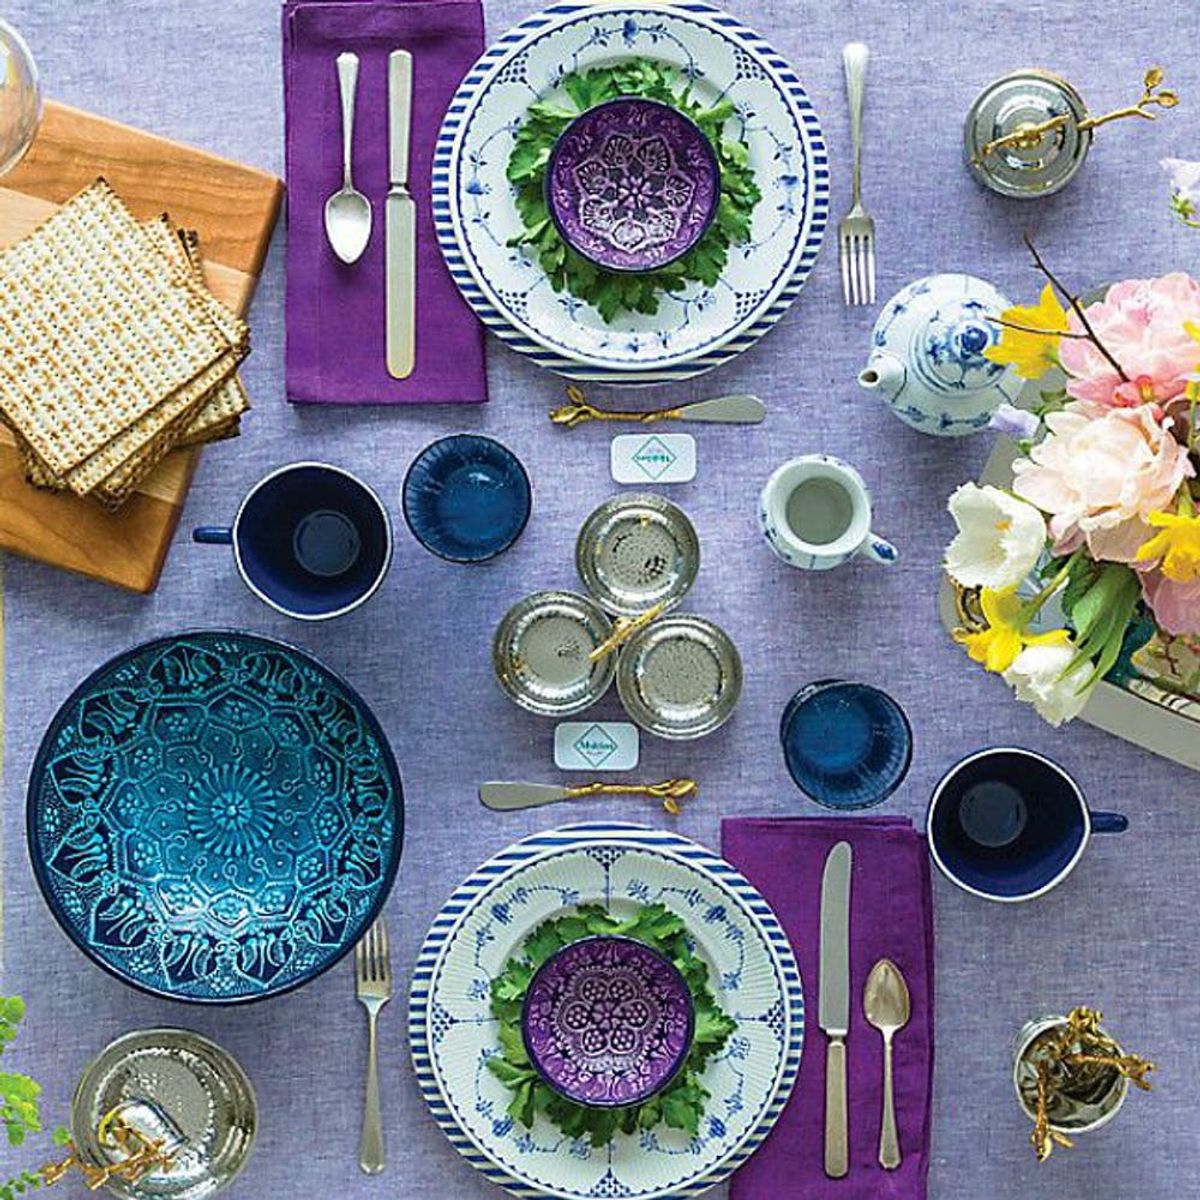 15 Beautiful Tablescape Ideas for Your Seder Dinner